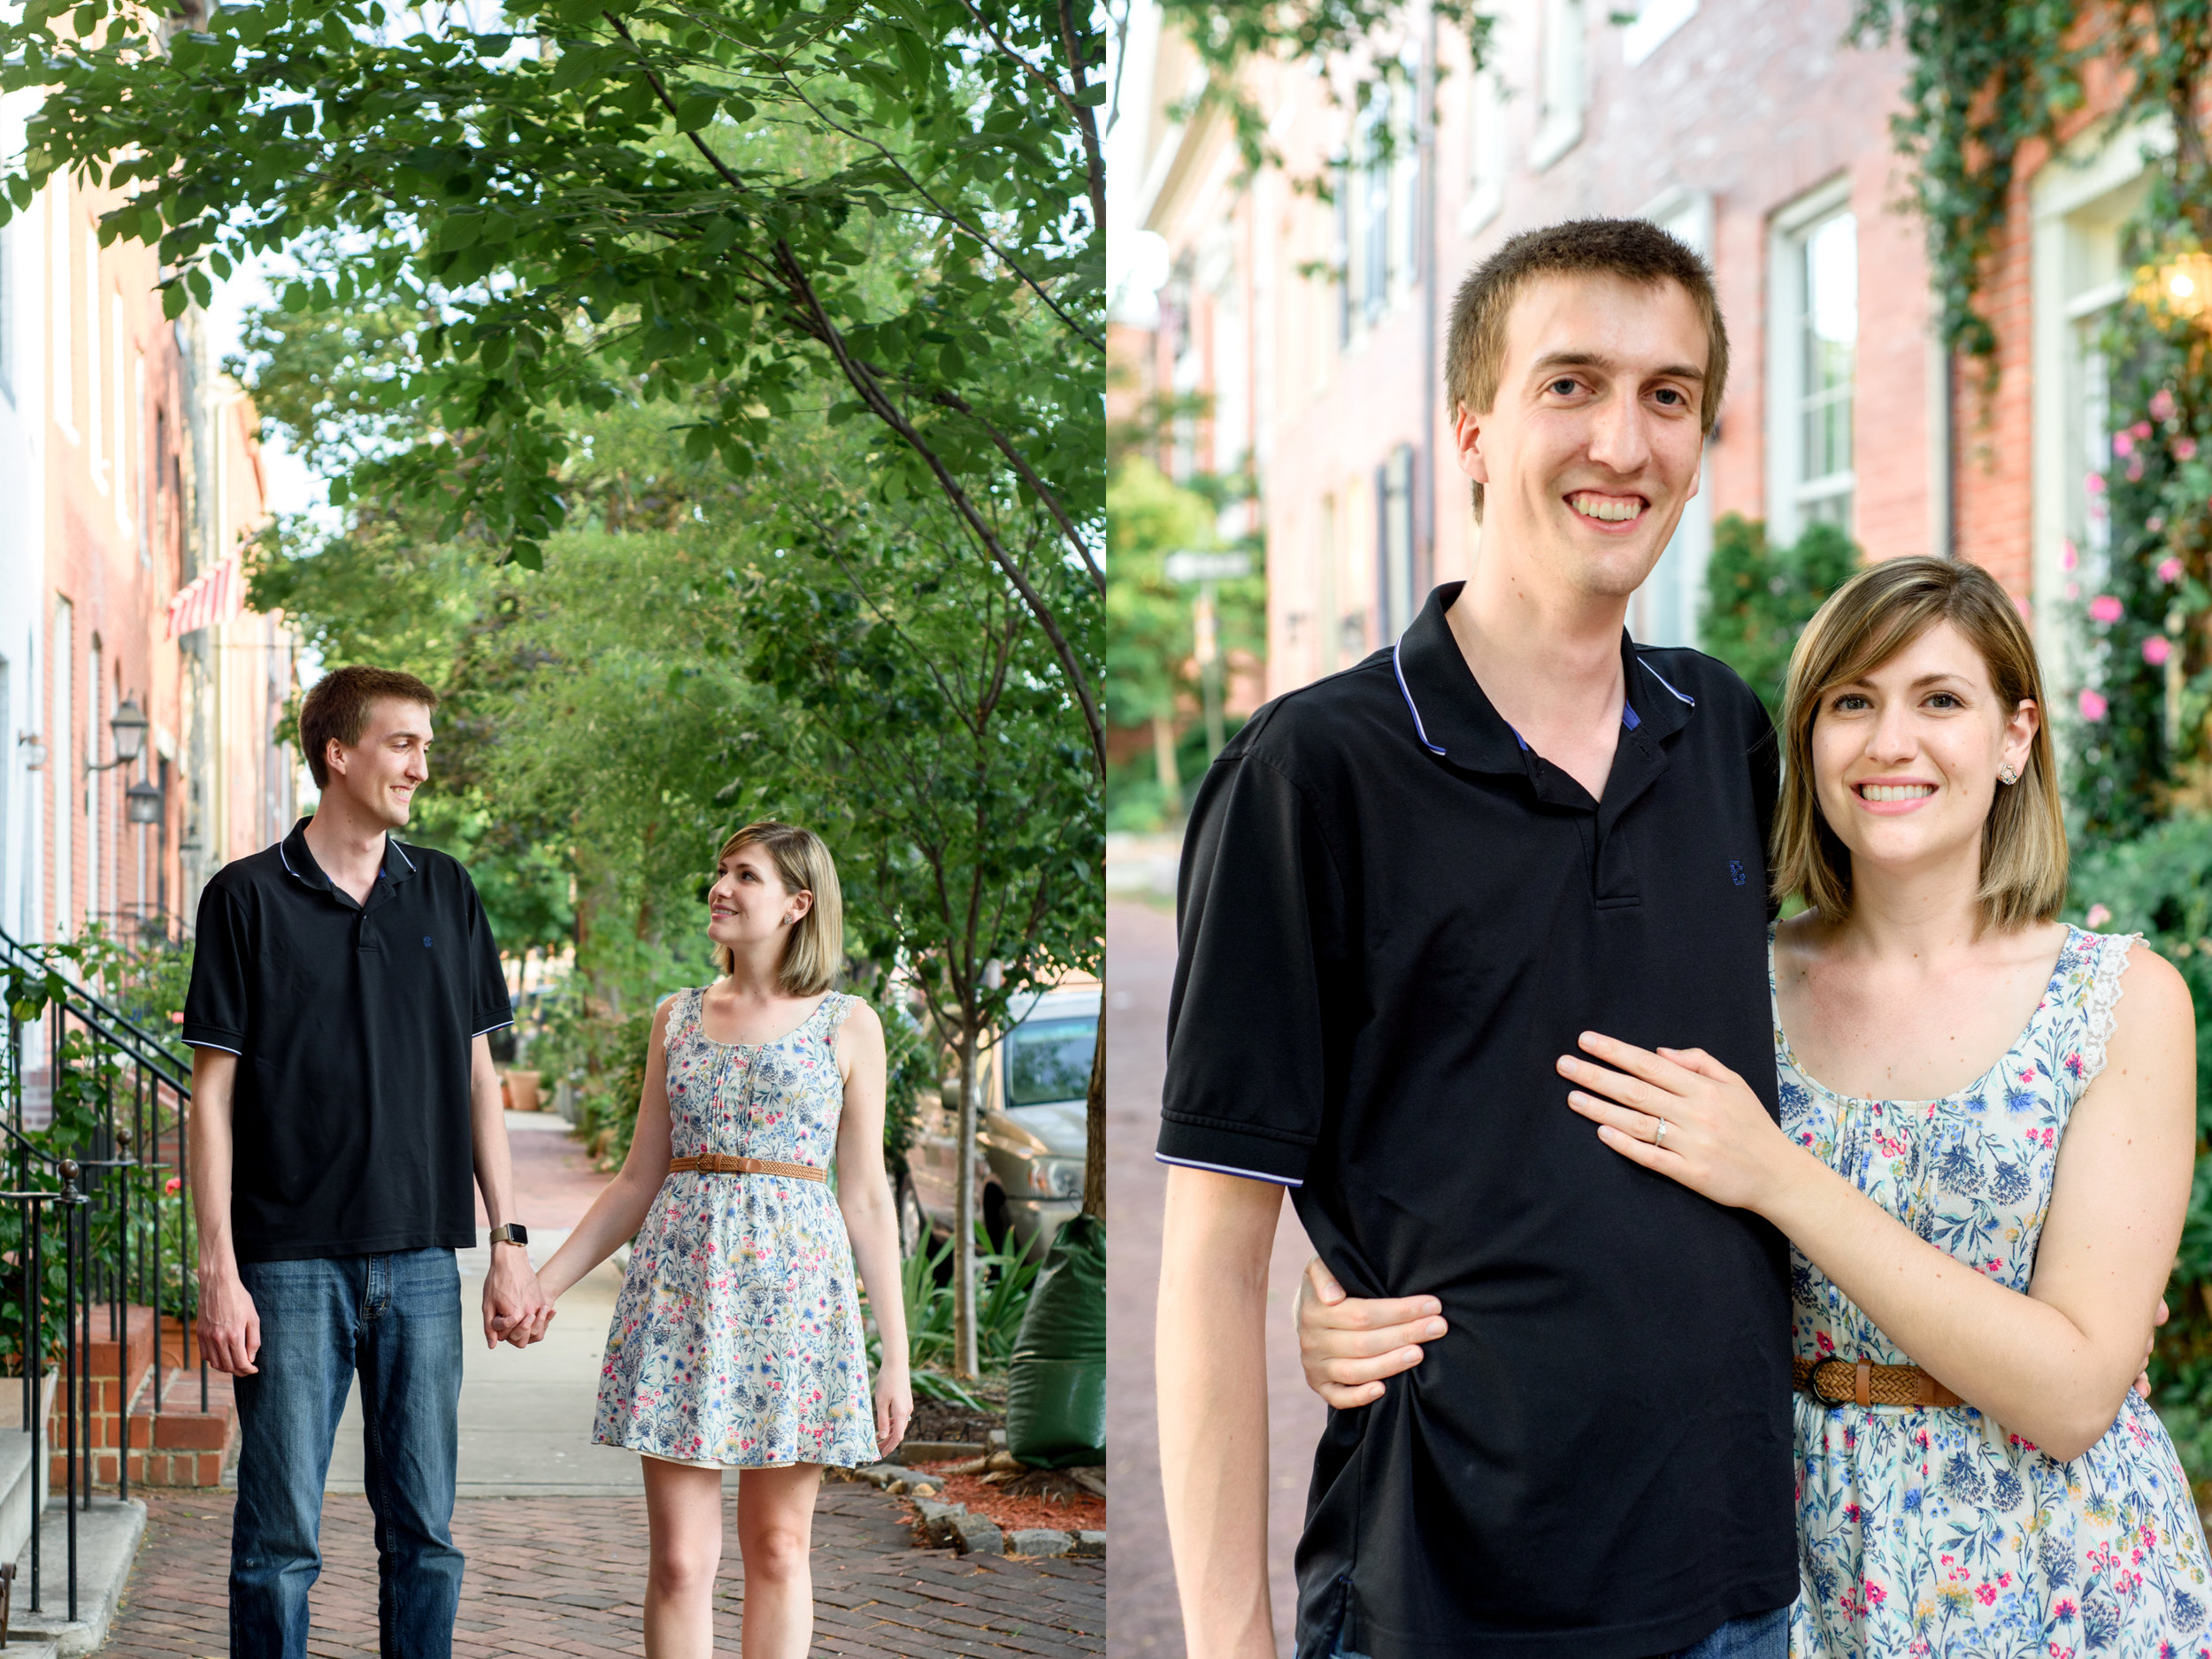 federal_hill-engagement_photography-15.jpg